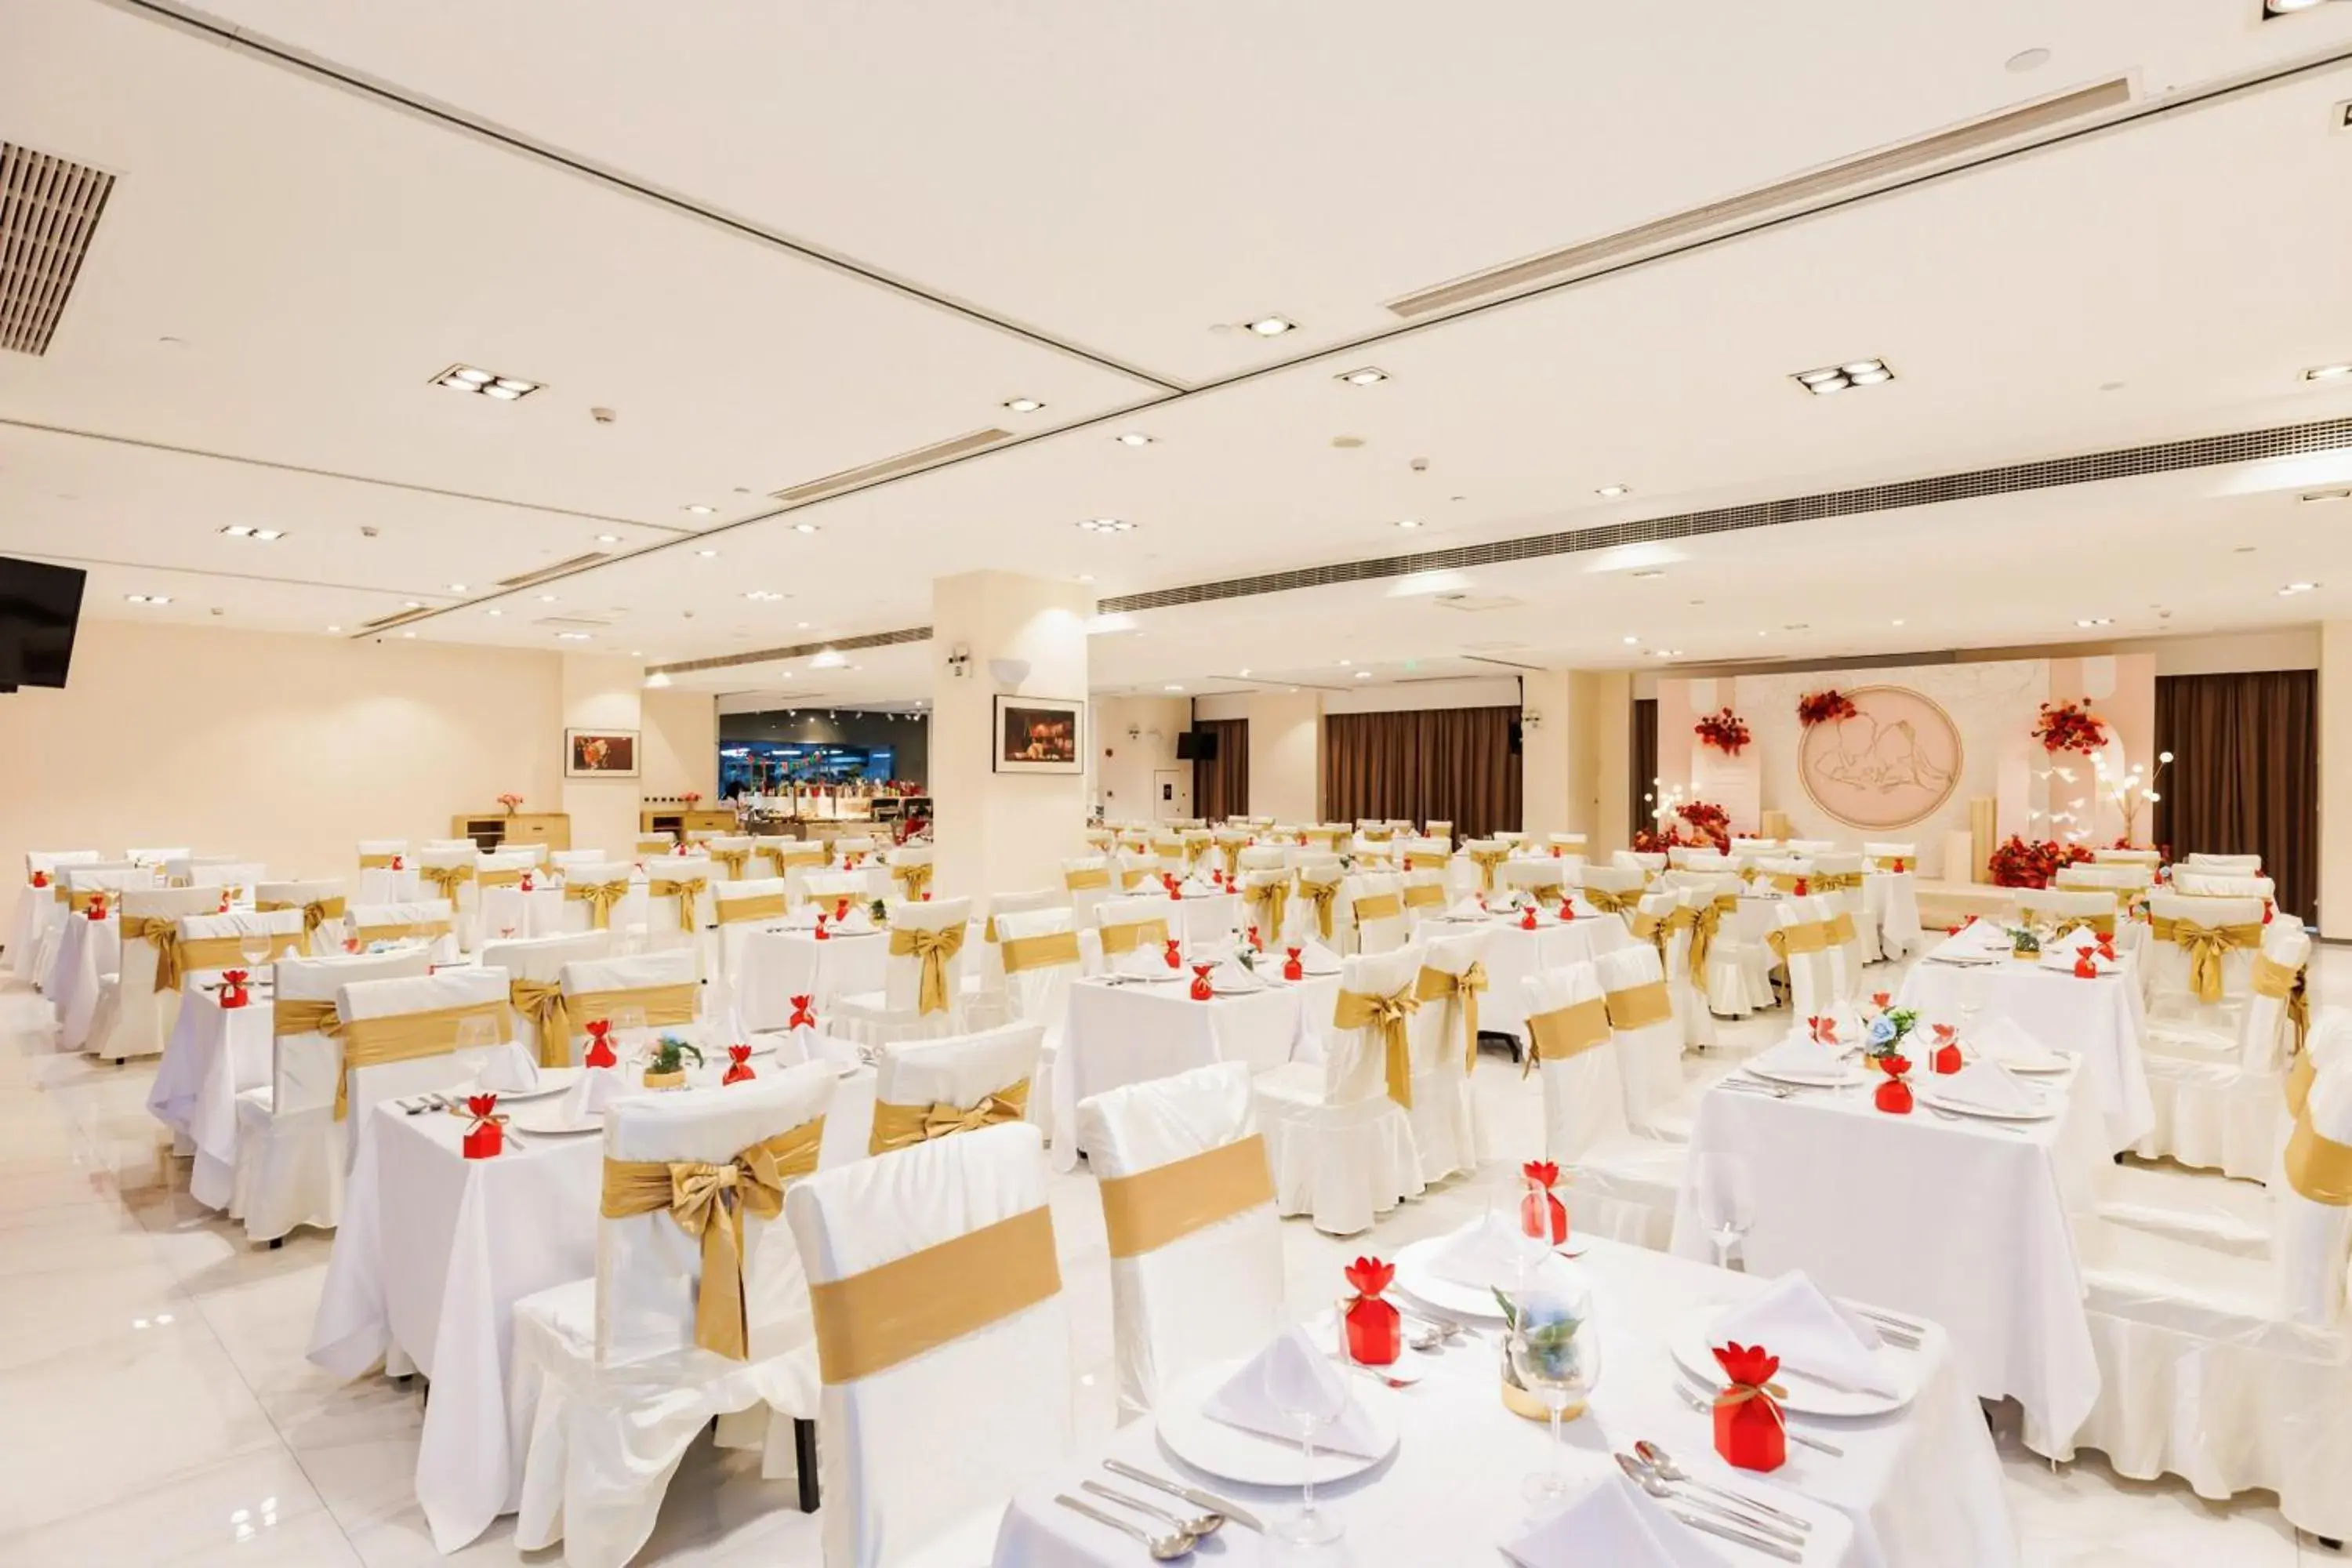 Meeting/conference room, Banquet Facilities in Bridal Tea House Hotel-Complimentary Welcome Drink before 30 Sep